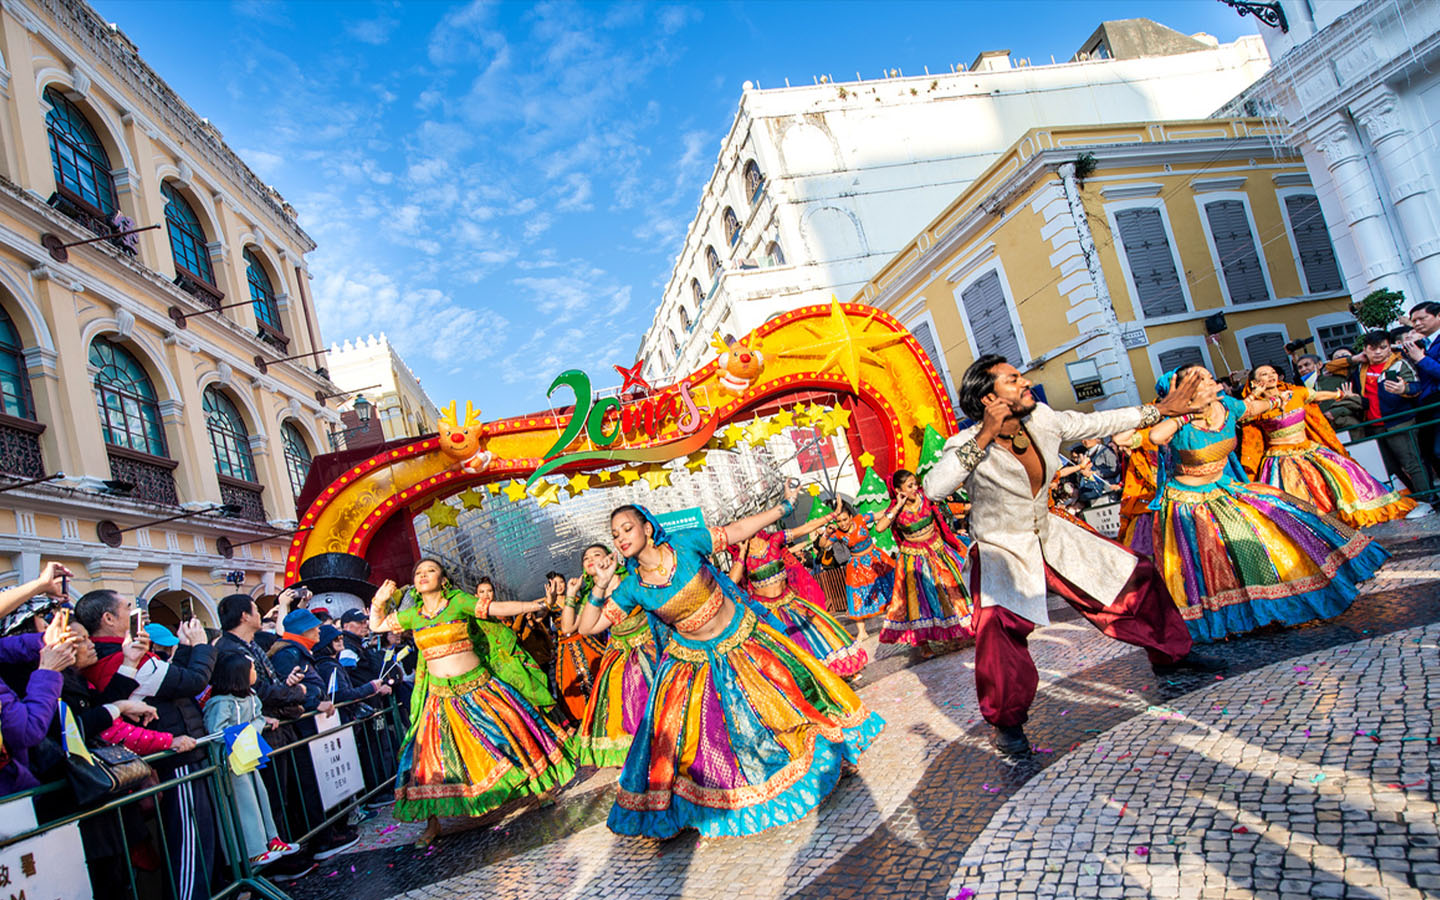 The Macao International Parade is recruiting performers and participants